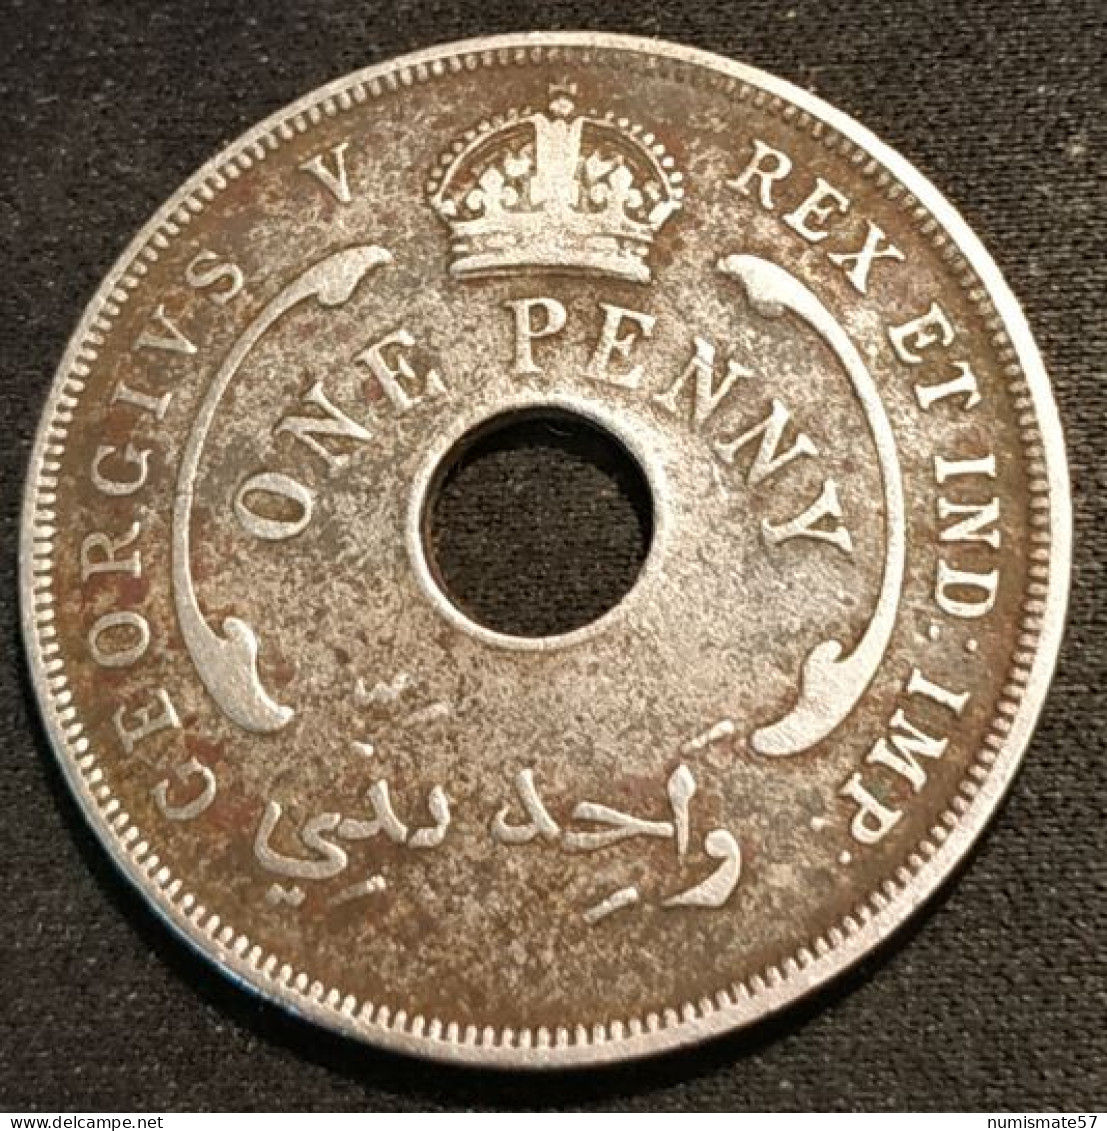 BRITISH WEST AFRICA - ONE PENNY 1928 - George V - KM 9 - ( Afrique Occidentale Britannique ) - Colonias